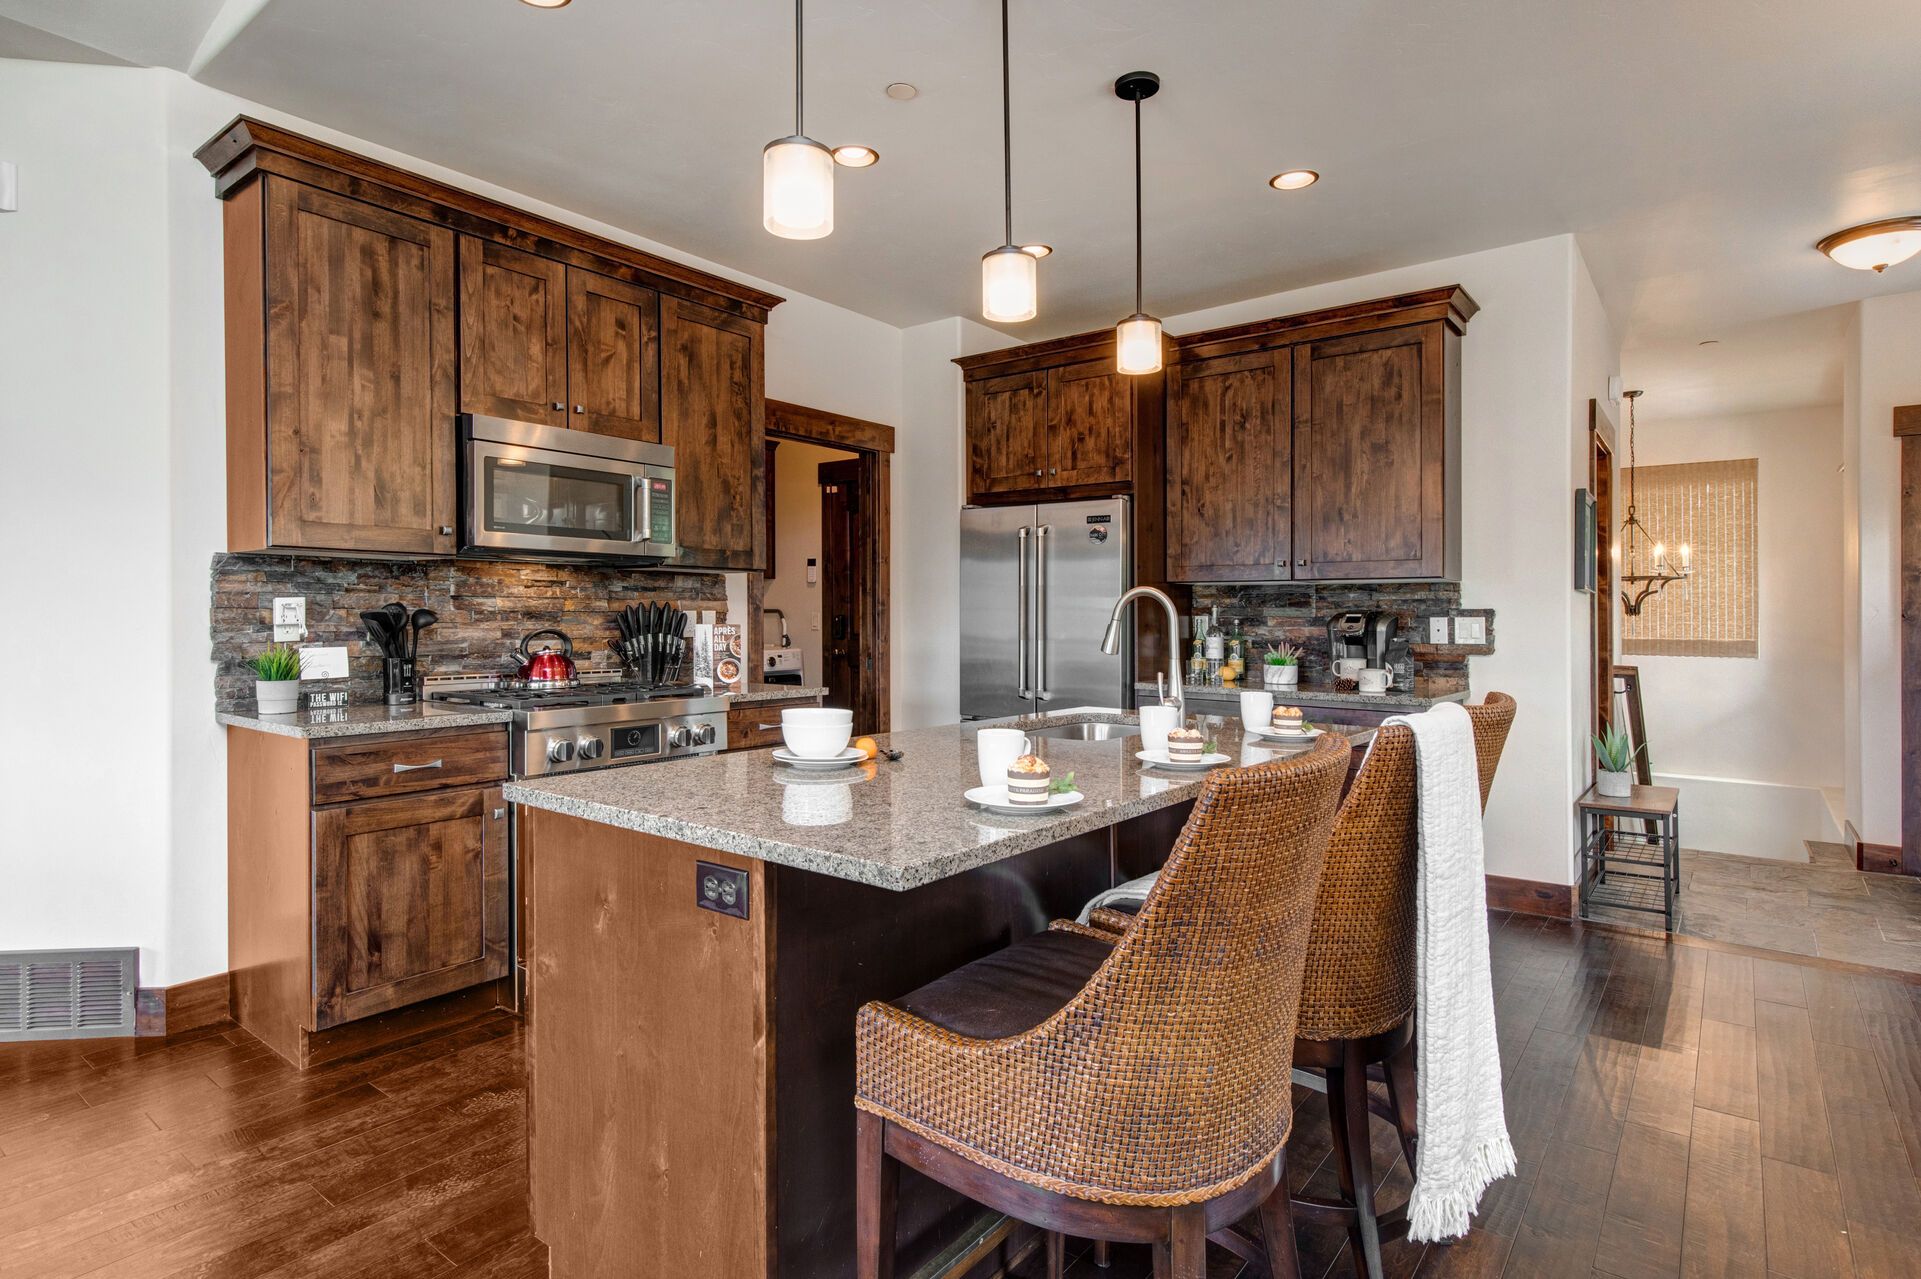 Fully Equipped Kitchen with beautiful stone countertops, modern stainless steel appliances, and island seating for 3